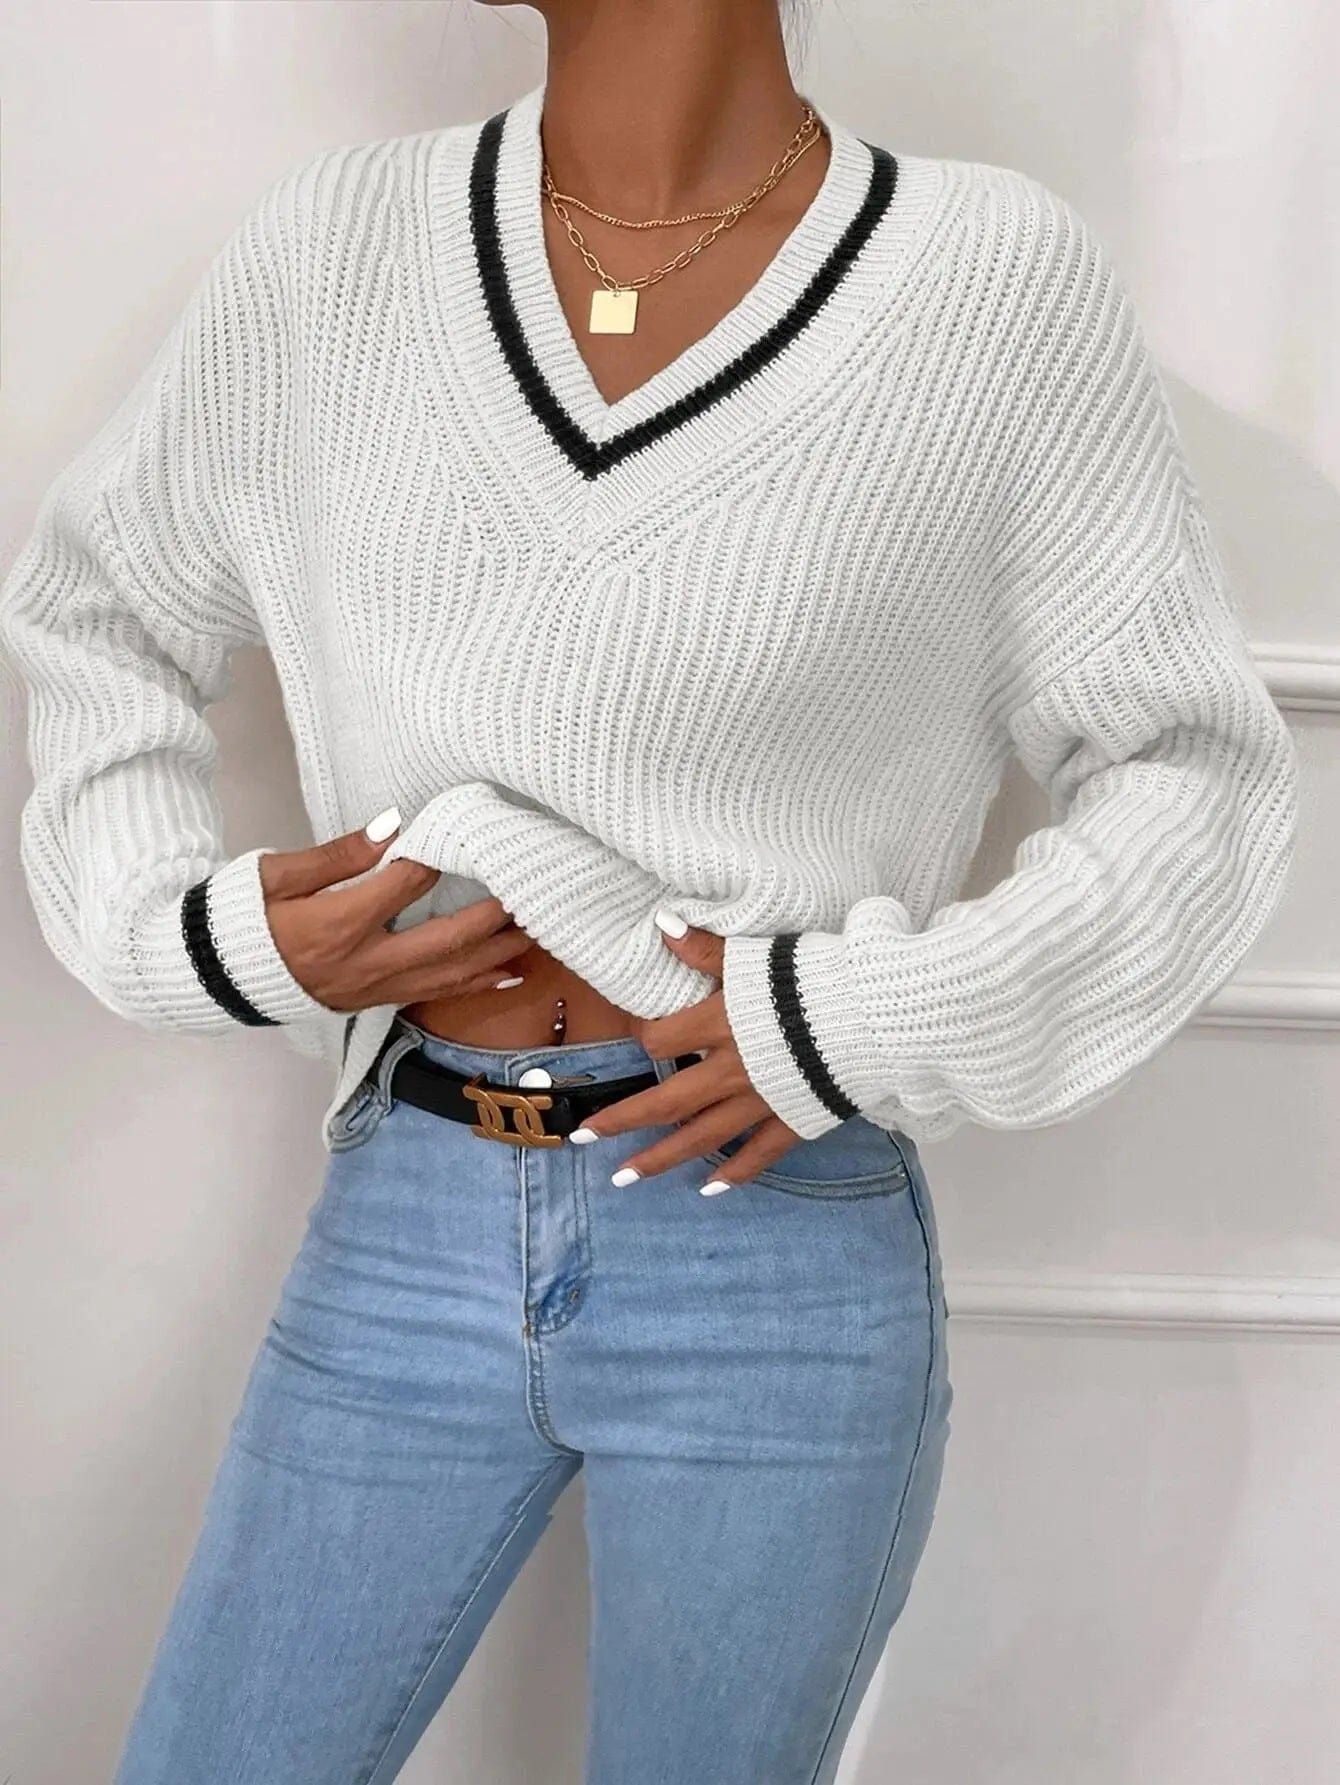 Cheky White / S Women's Clothes Cable Knit V Neck Sweaters Casual Long Sleeve Striped Pullover Sweater Trendy Loose Preppy Jumper Top